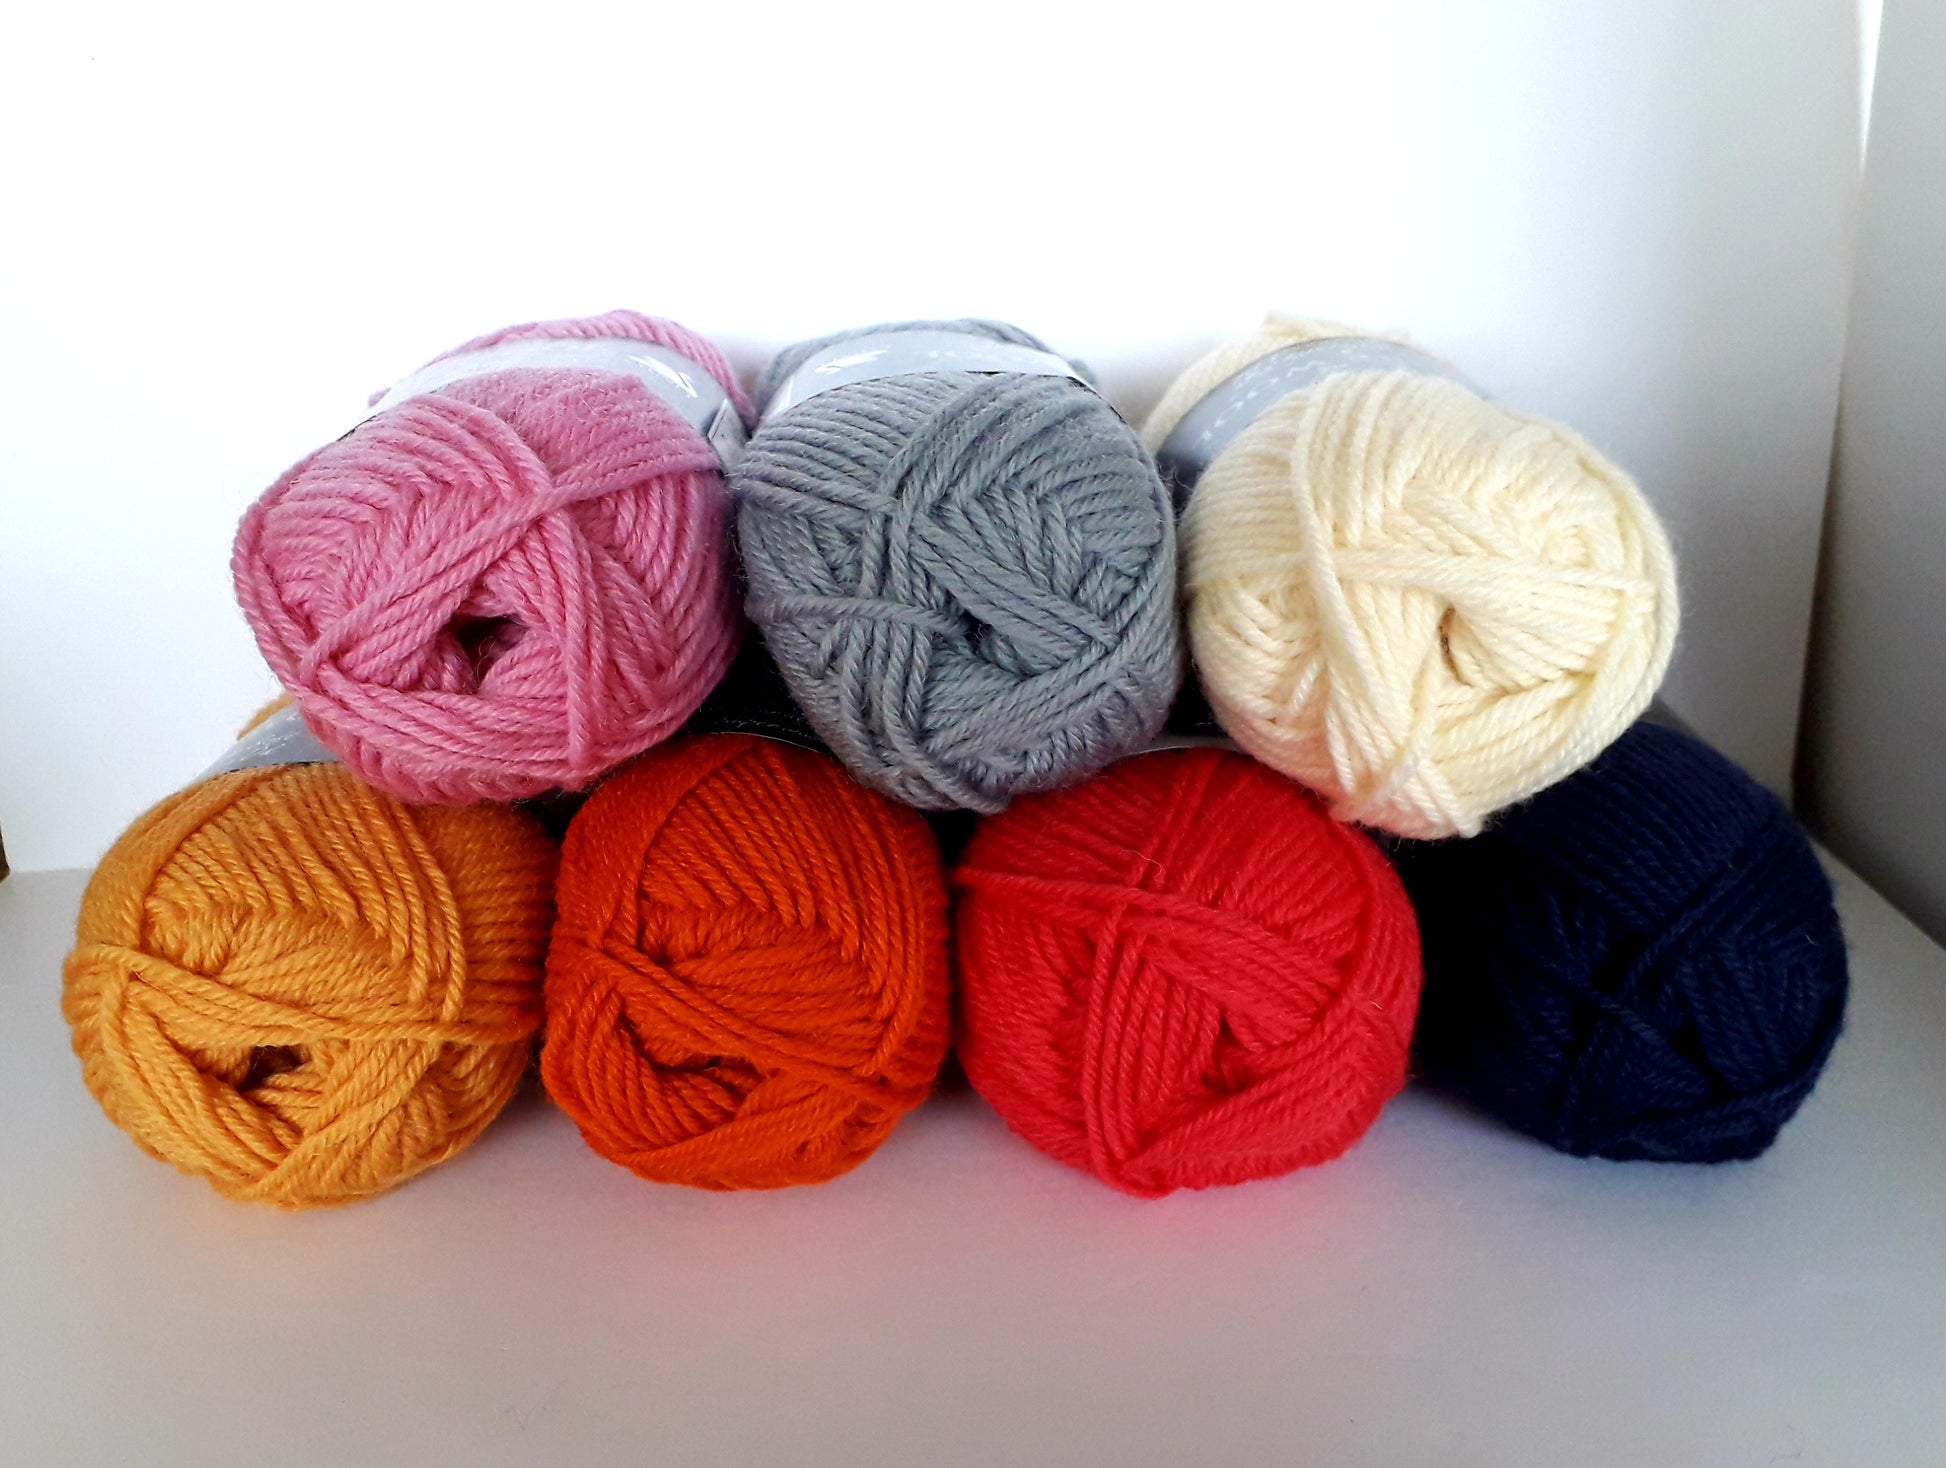 7 balls of yarn are stacked on top of each other. Their colours include white, grey, pink, orange, red, yellow and dark blue. 